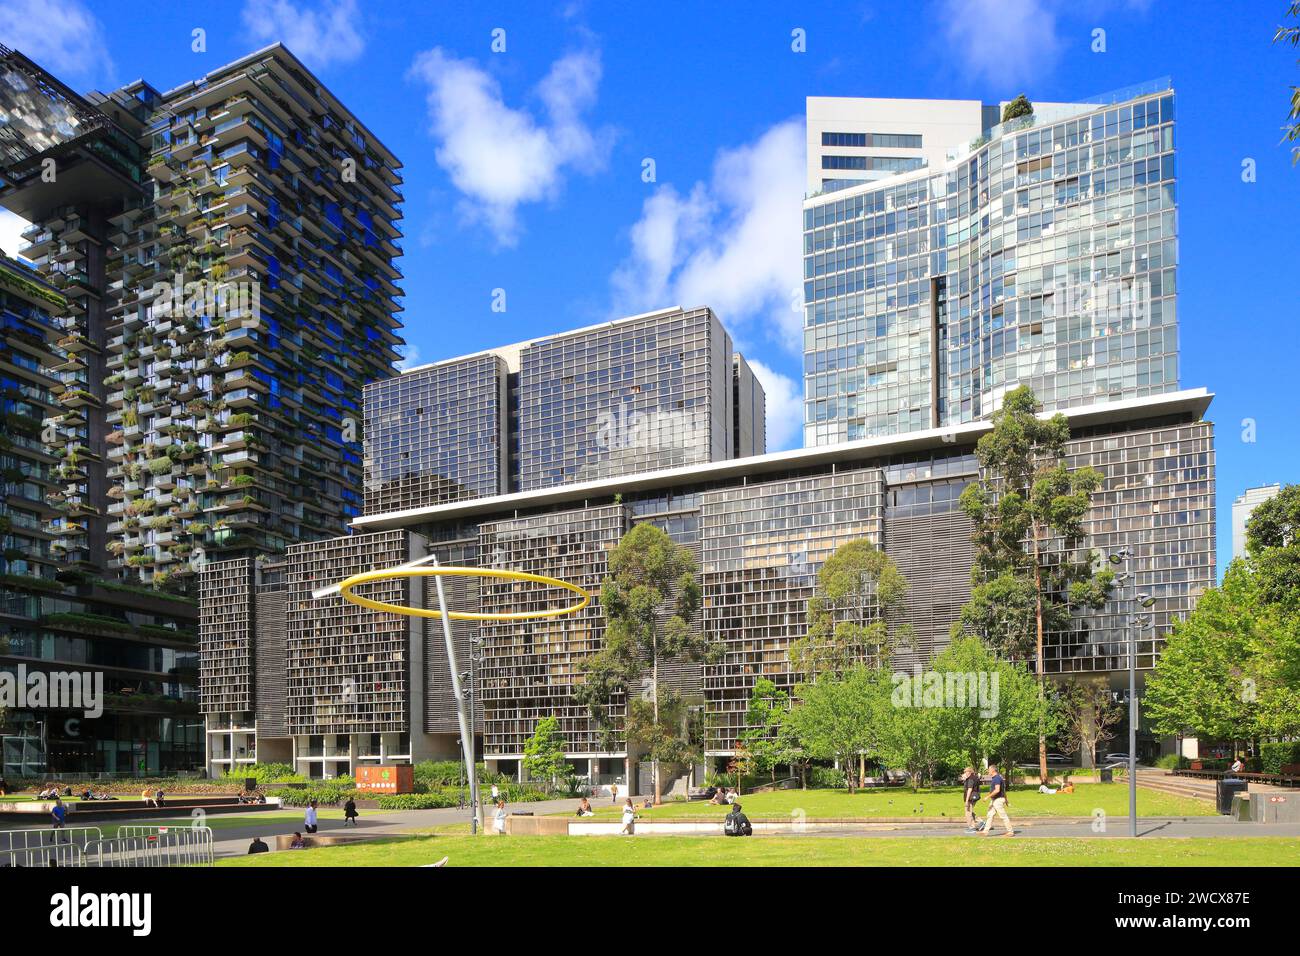 Australia, New South Wales, Sydney, Chippendale Green, office and housing complex with the Halo sculpture by artists Jennifer Turpin and Michaelie Crawford Stock Photo